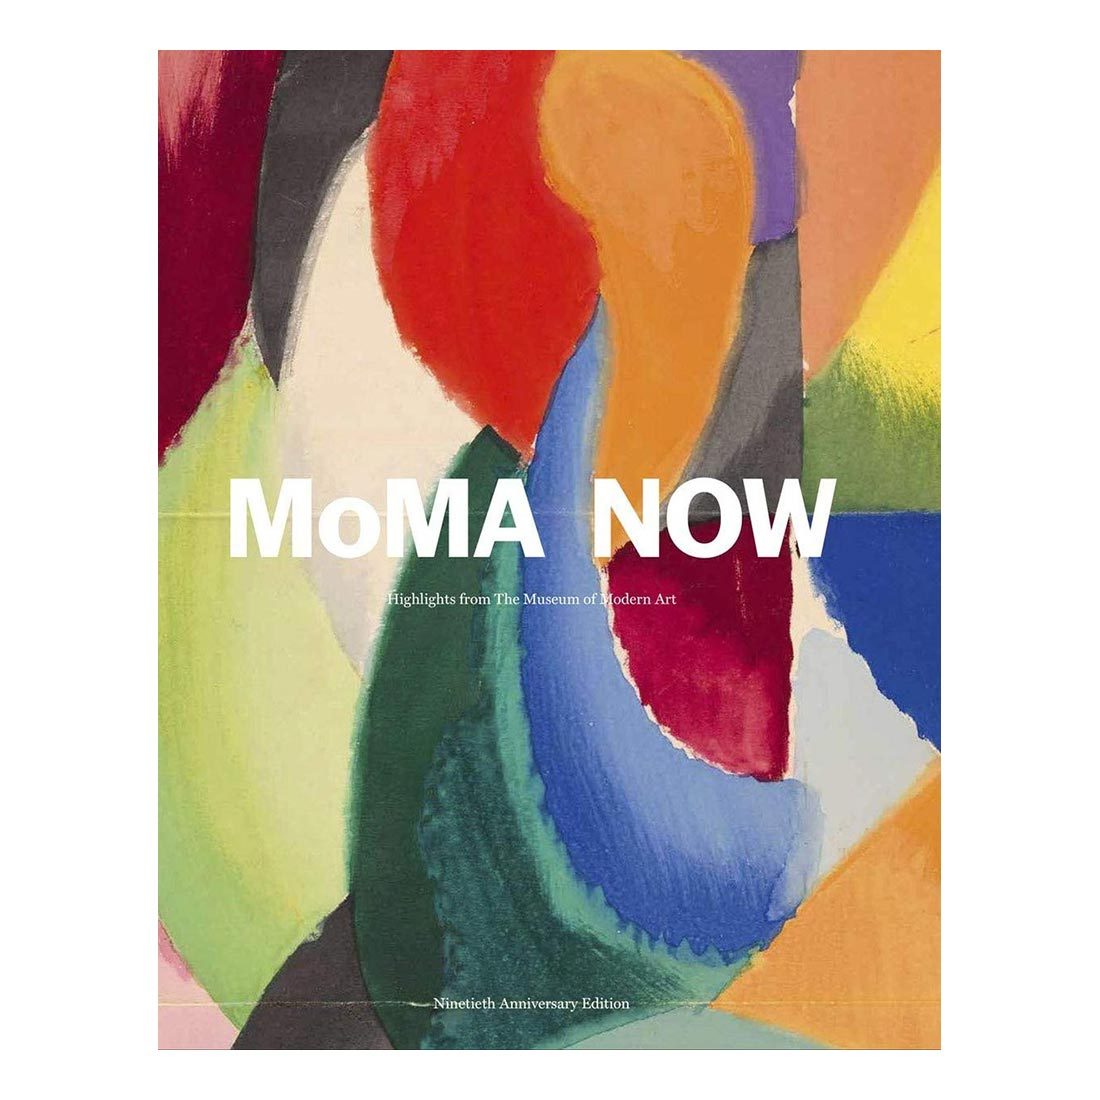 MoMA Now: Highlights from The Museum of Modern Art, New York